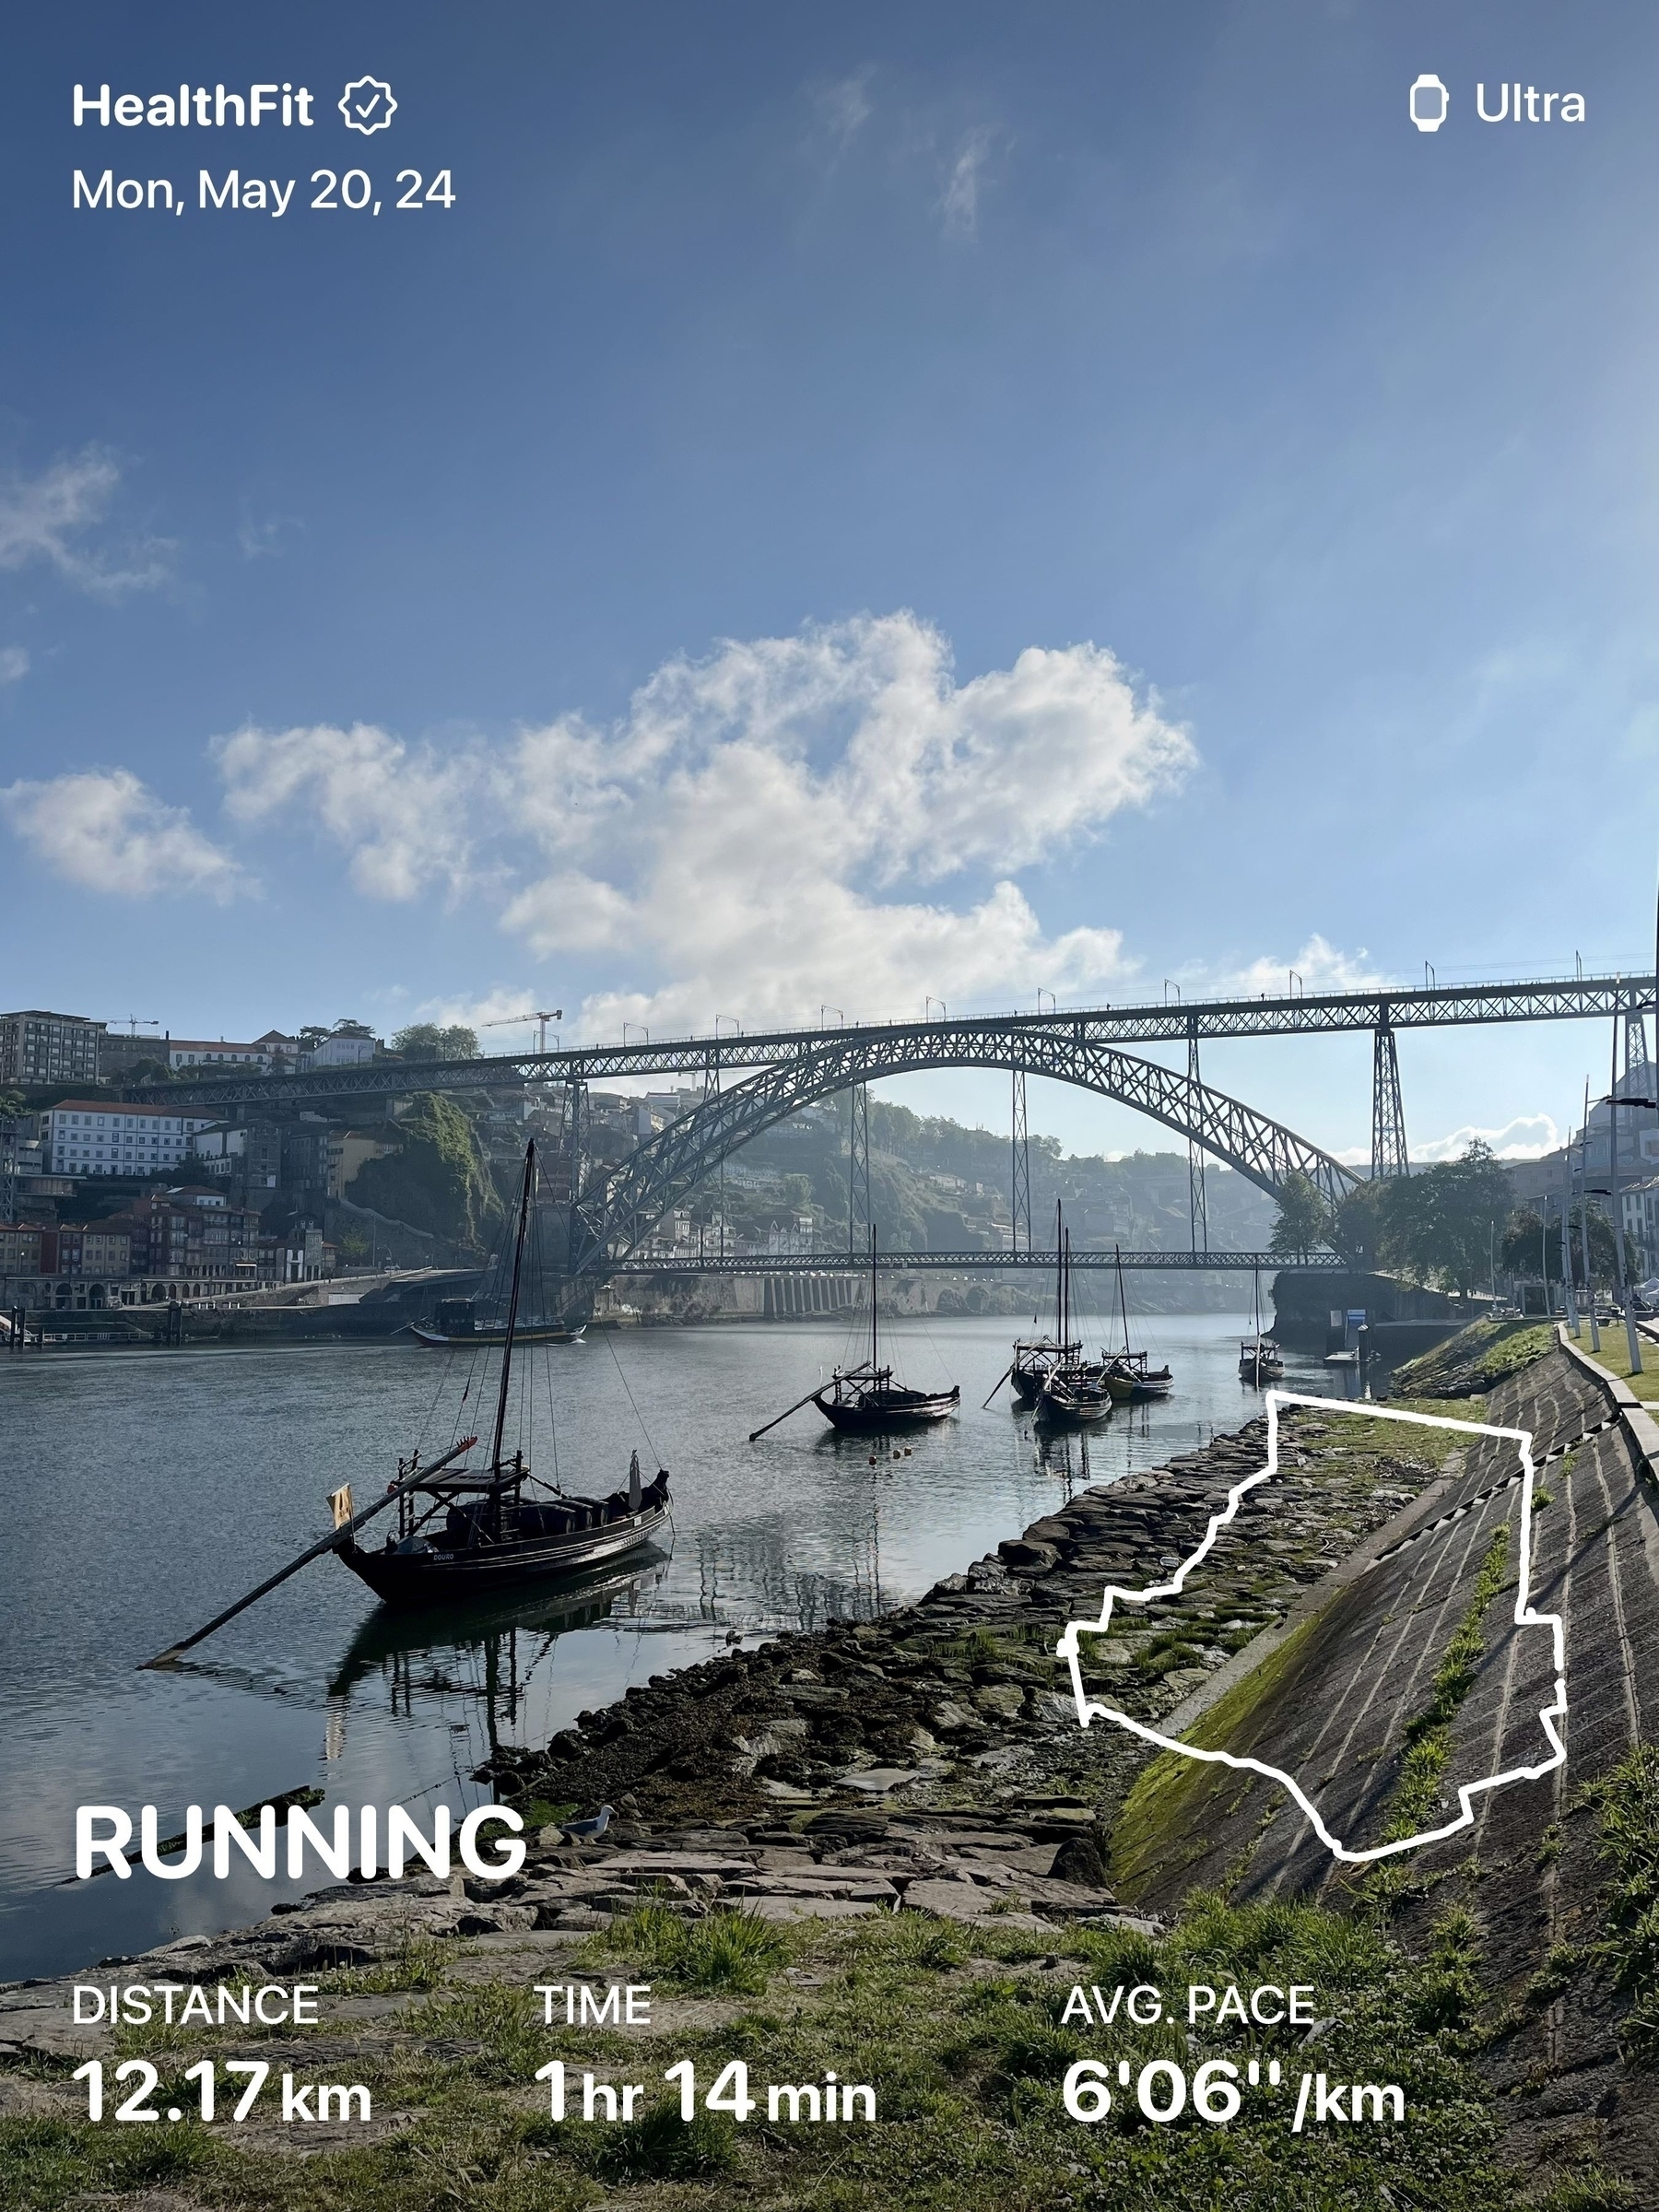 Traditional boats float on calm water with a metal arch bridge in the background, under a partly cloudy sky. Text overlay: HealthFit, Mon, May 20, 24, Ultra, RUNNING, DISTANCE 12.17 km, TIME 1hr 14min, AVG PACE 6:06/km.